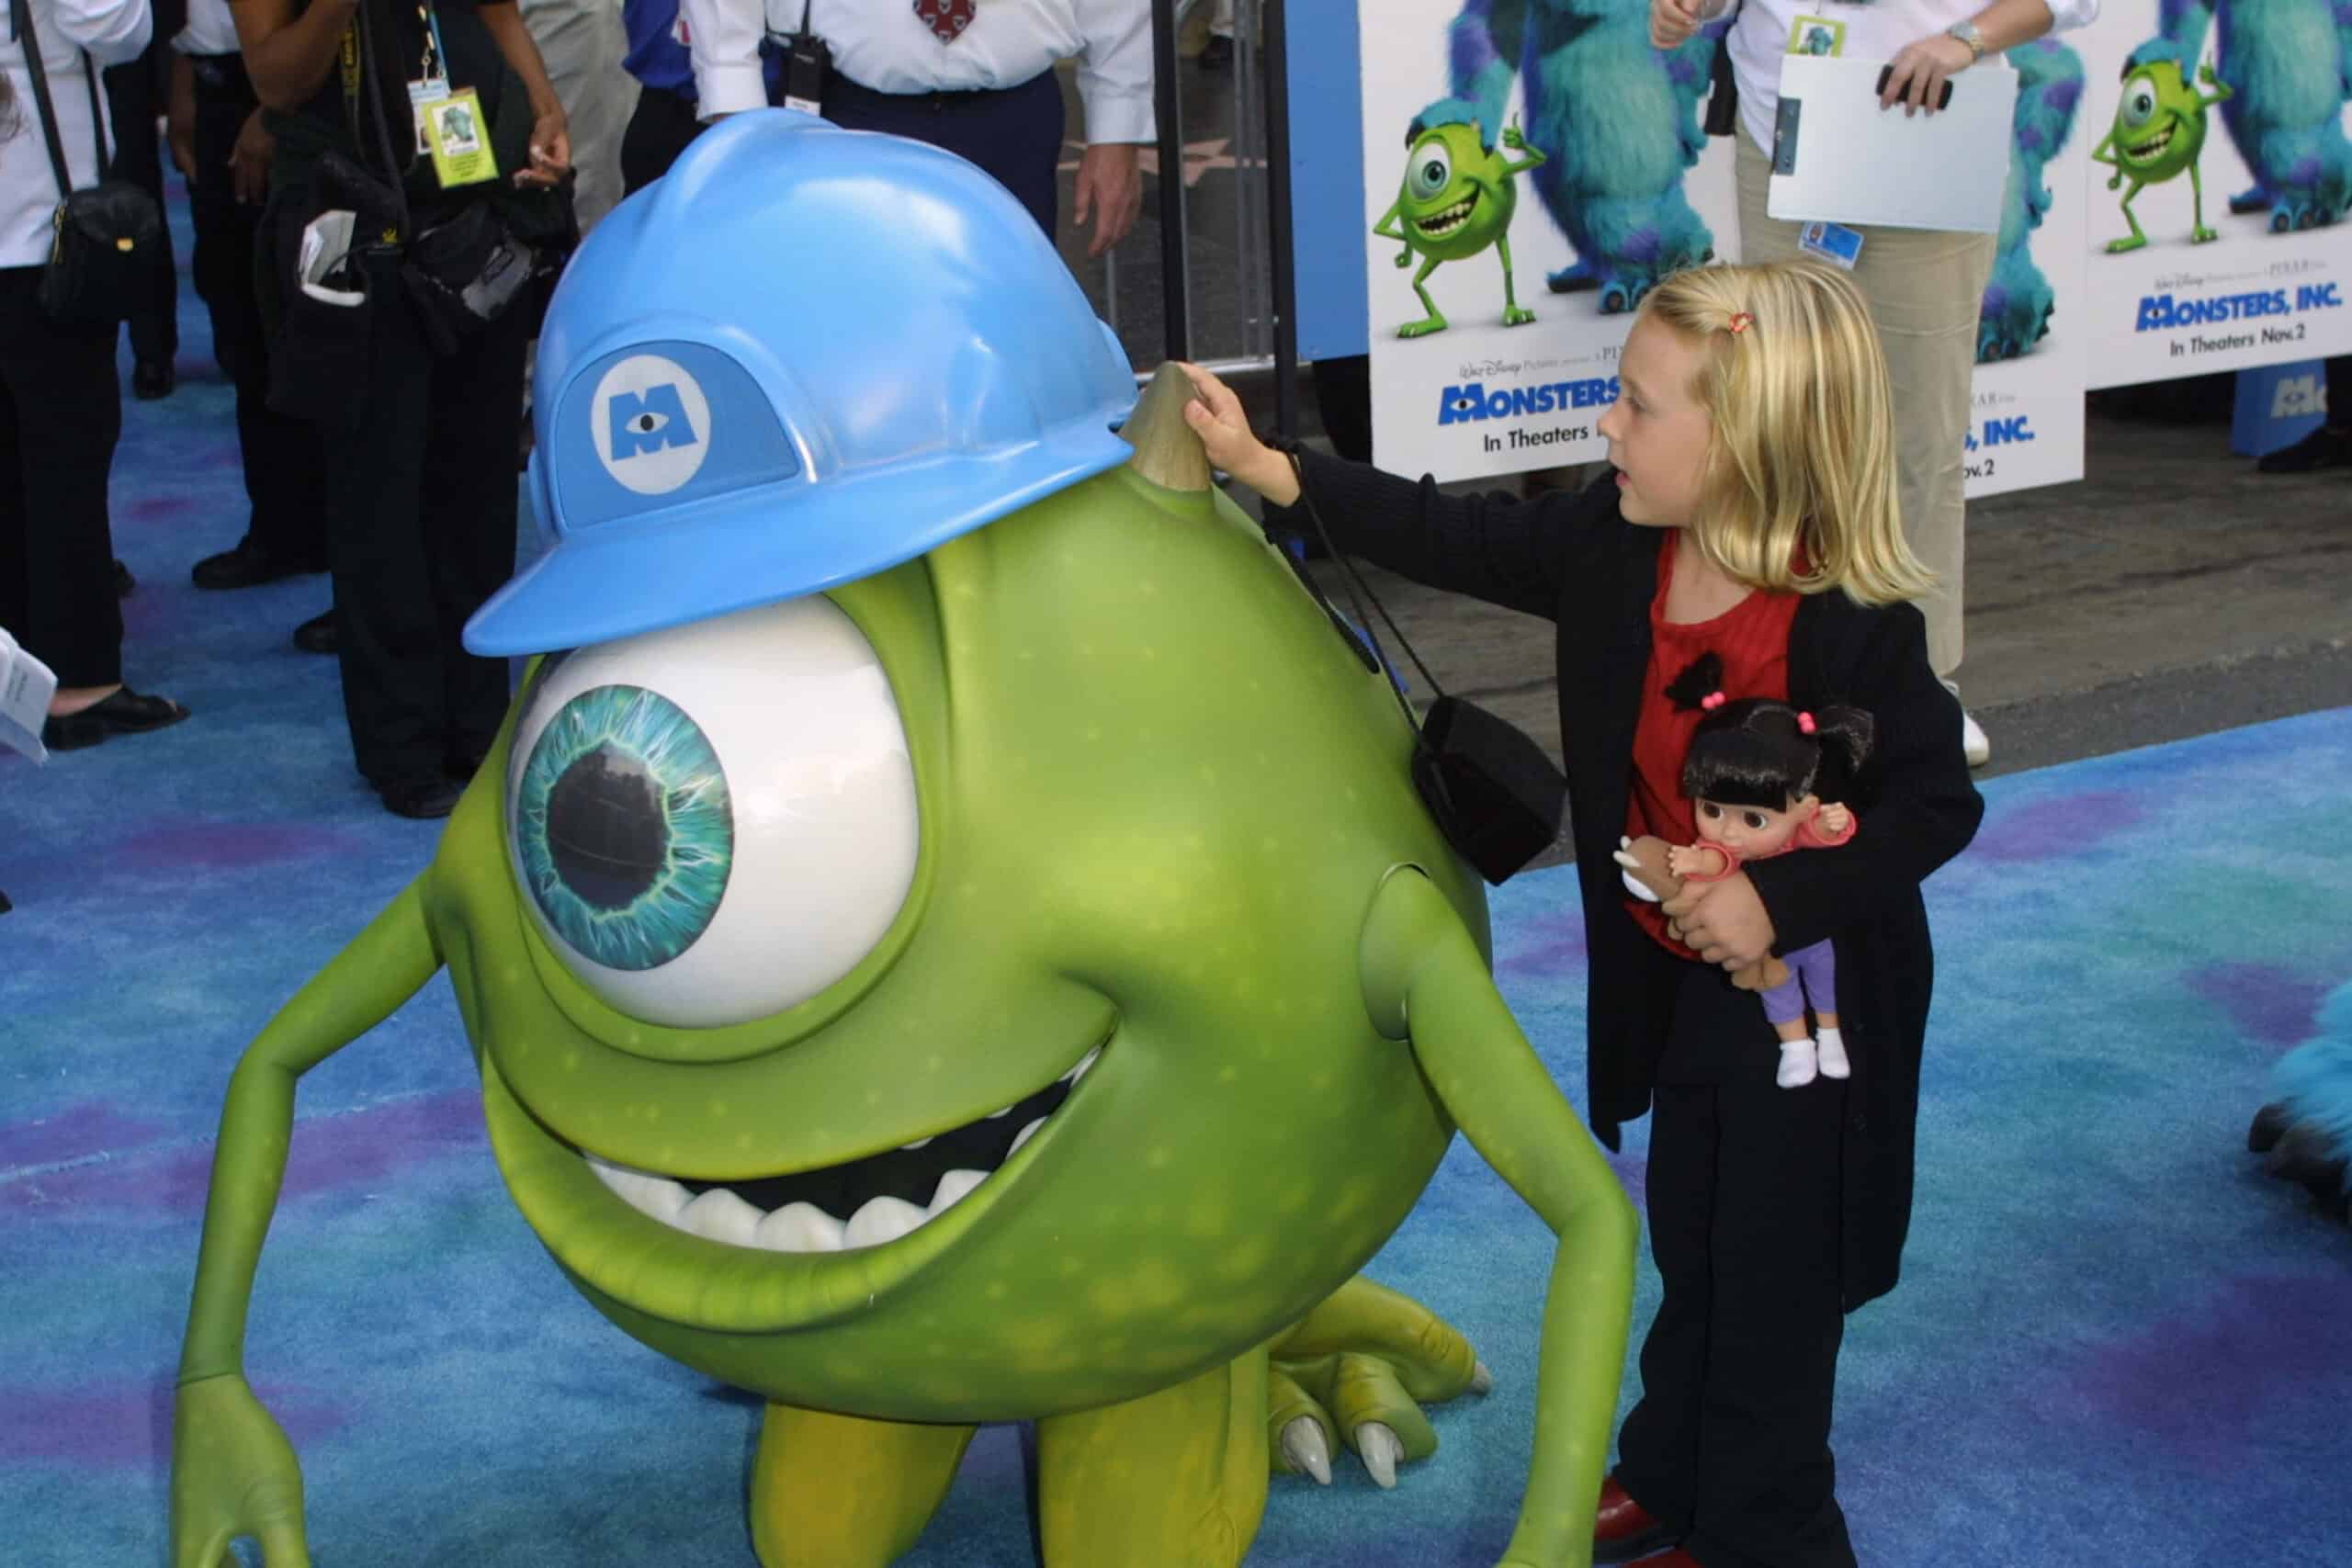 Celebs Attend World Premiere Of Monsters, Inc.